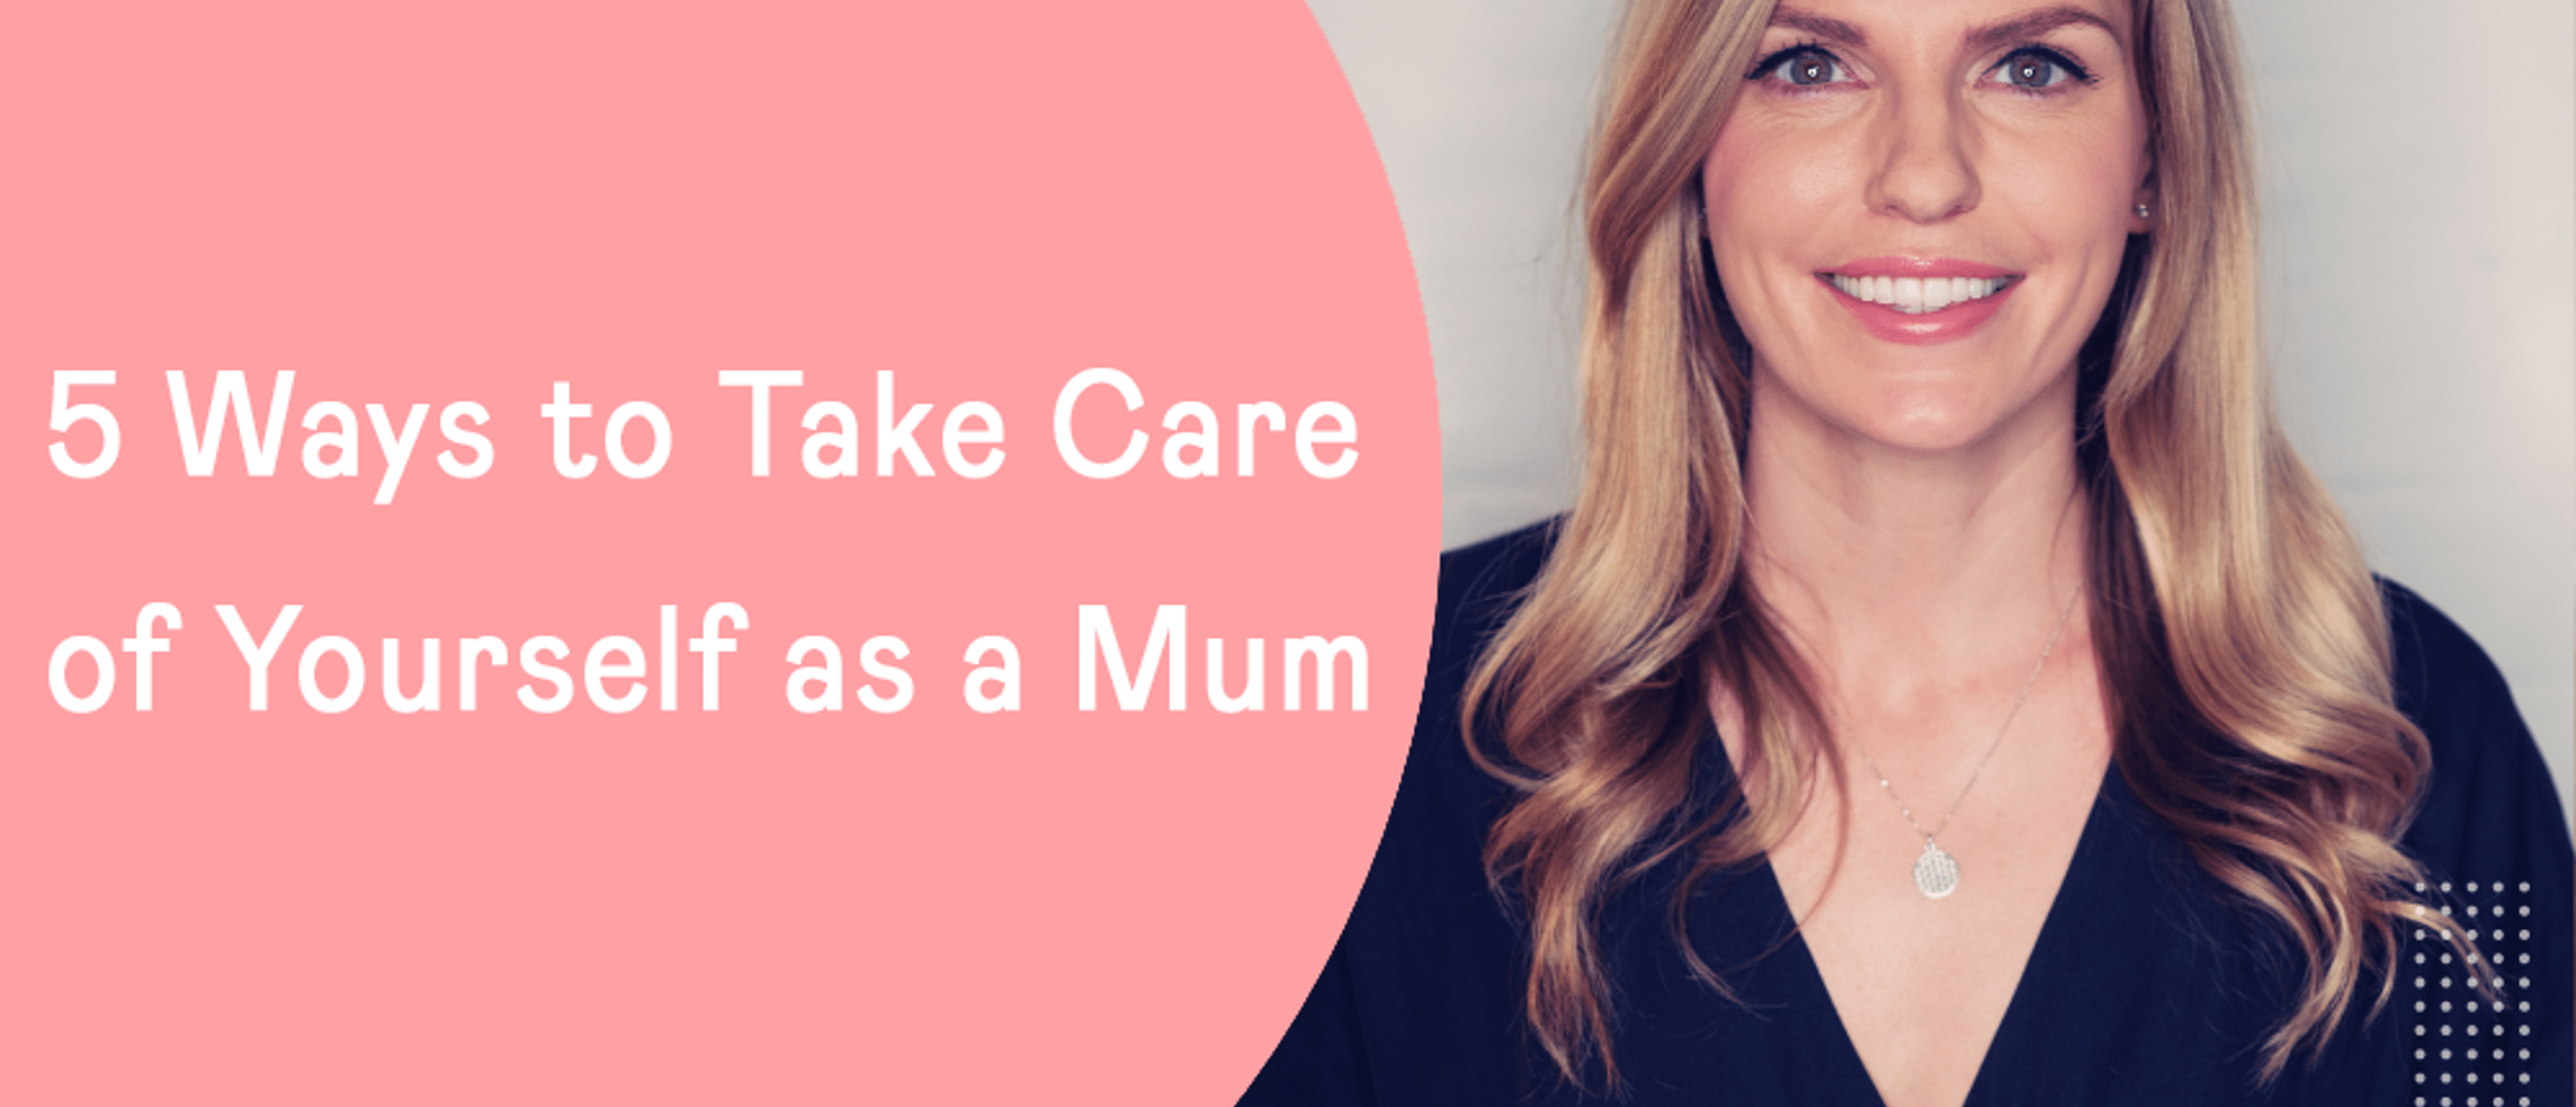 5 Ways to Take Care of Yourself as a Mum